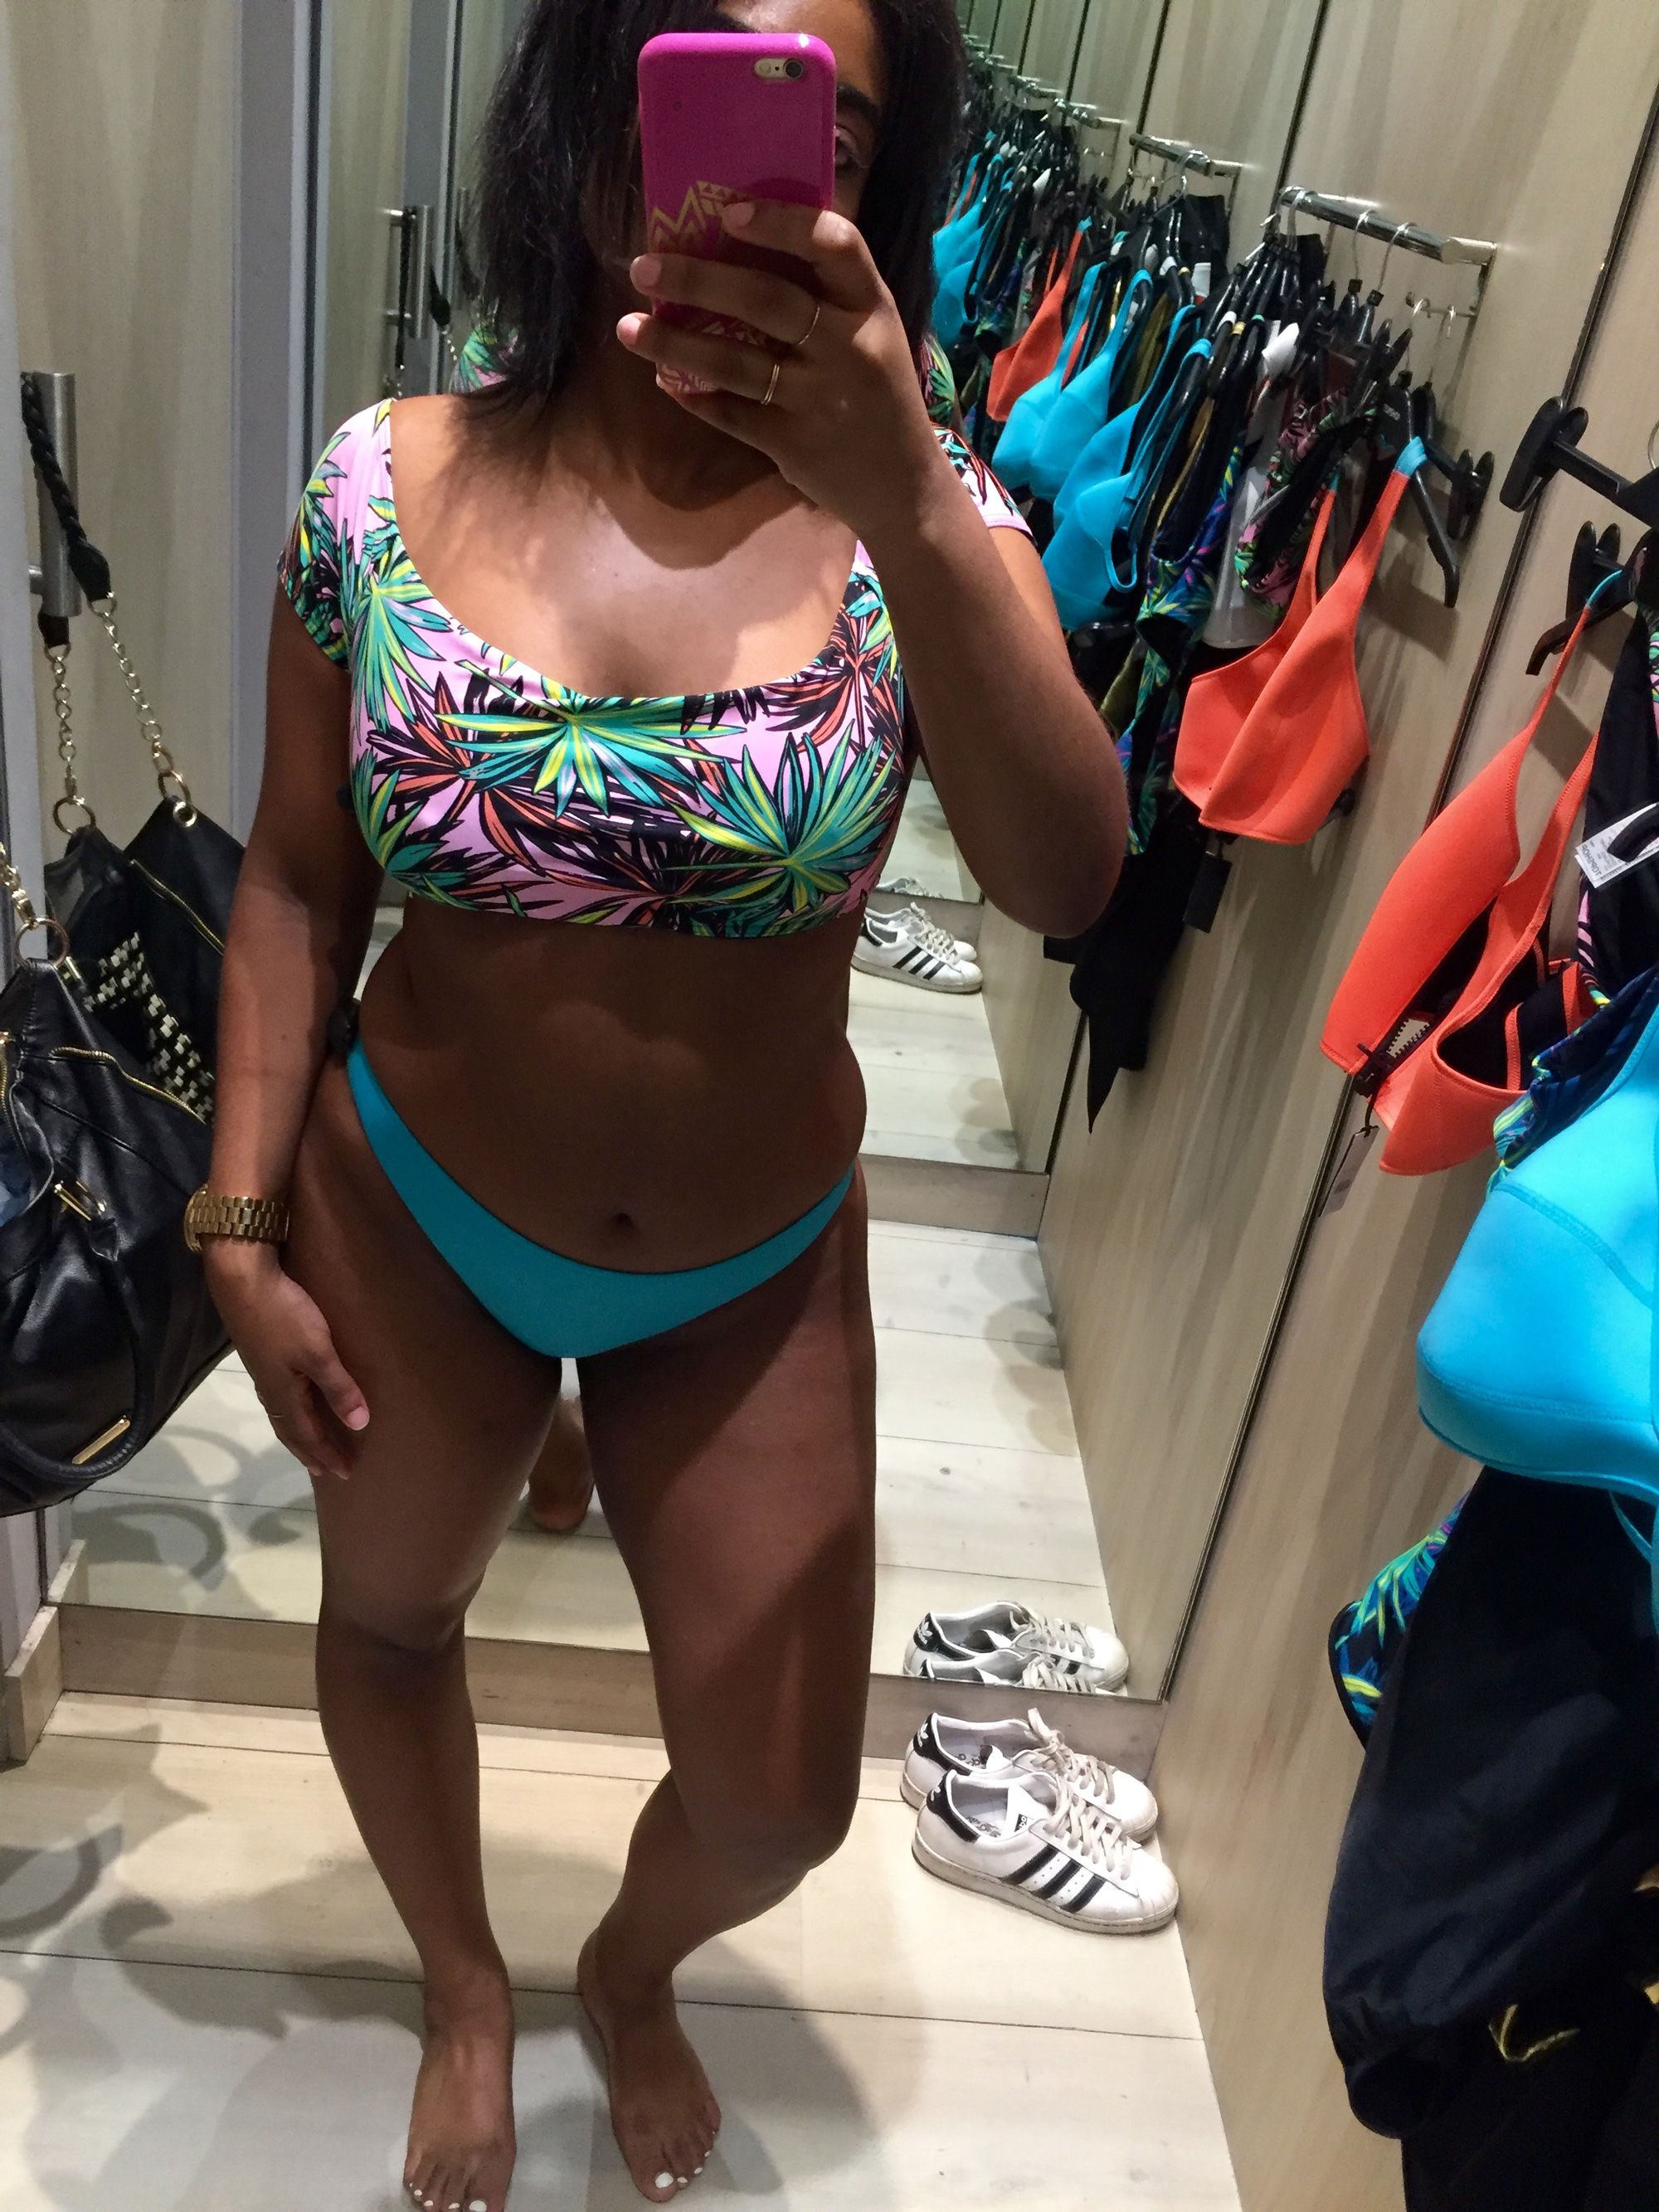 Here's What Happened When I Tried On Kendall and Kylie's New Swimwear Line